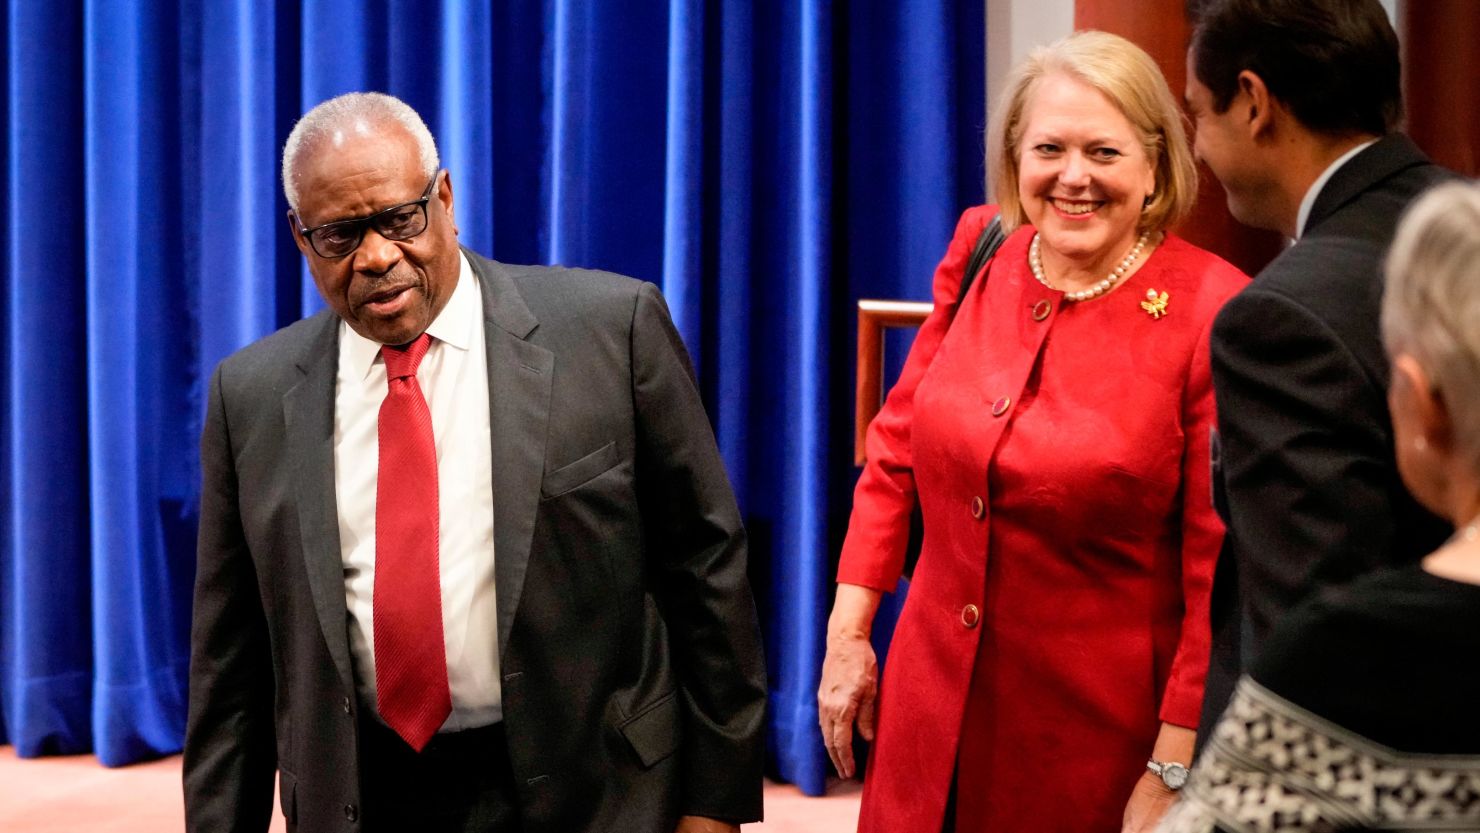 Associate Supreme Court Justice Clarence Thomas and his wife and conservative activist Virginia Thomas arrive at the Heritage Foundation on October 21, 2021 in Washington, DC.